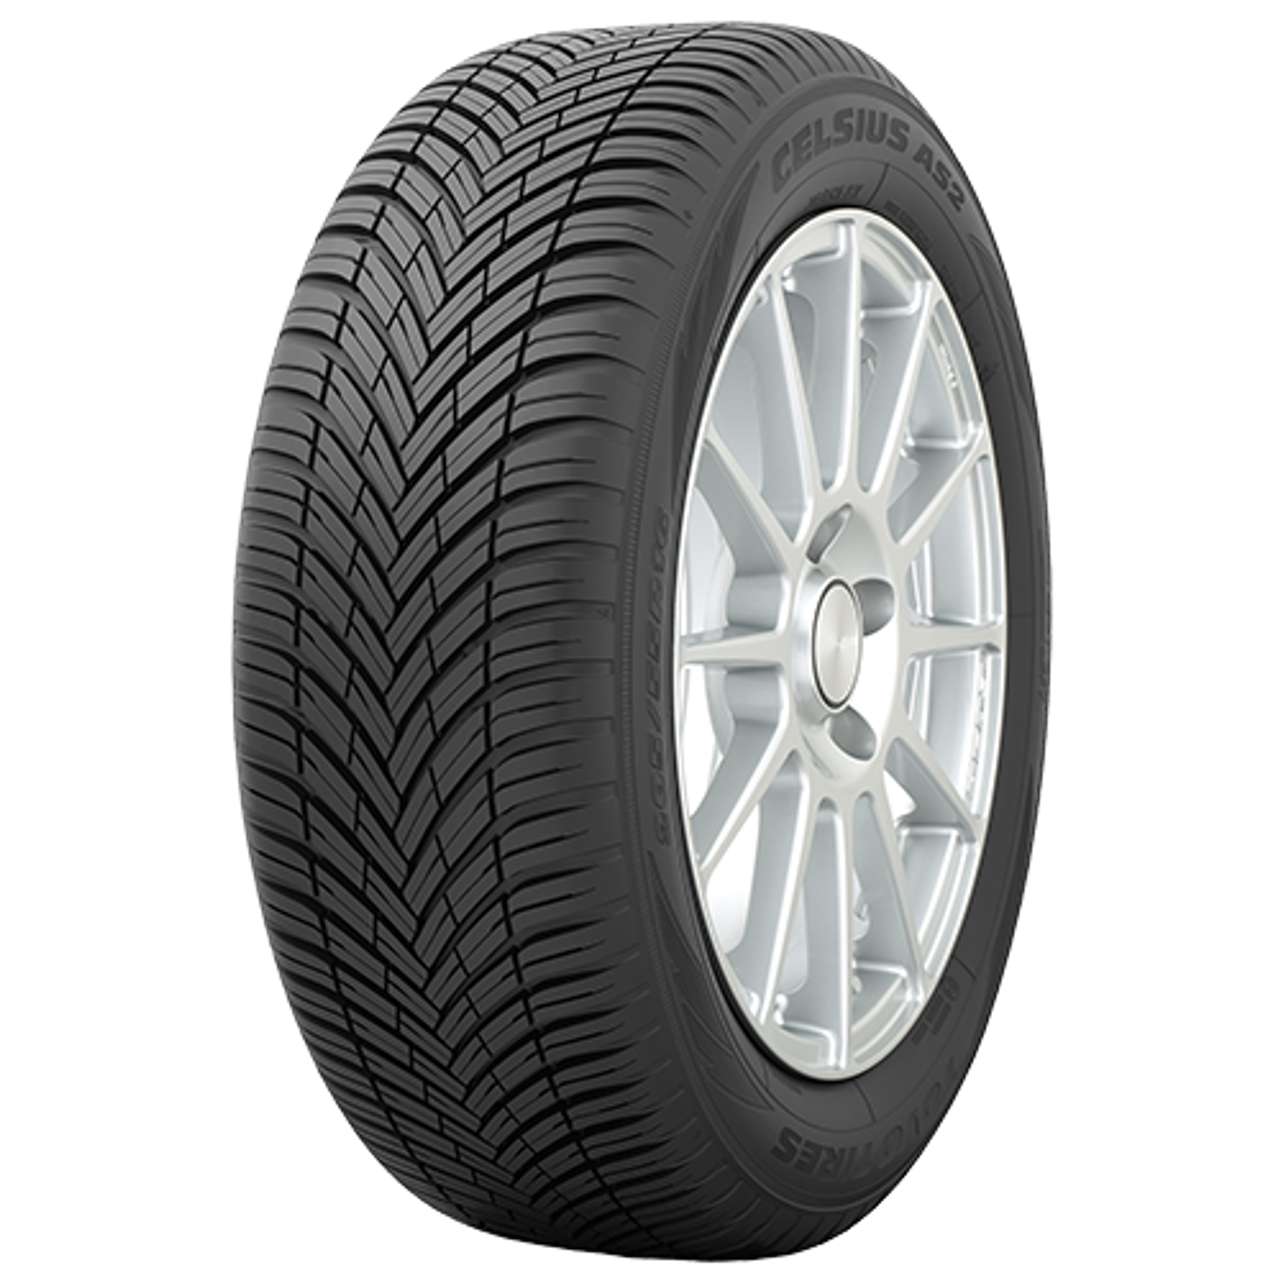 TOYO CELSIUS AS2 205/60R16 96V BSW